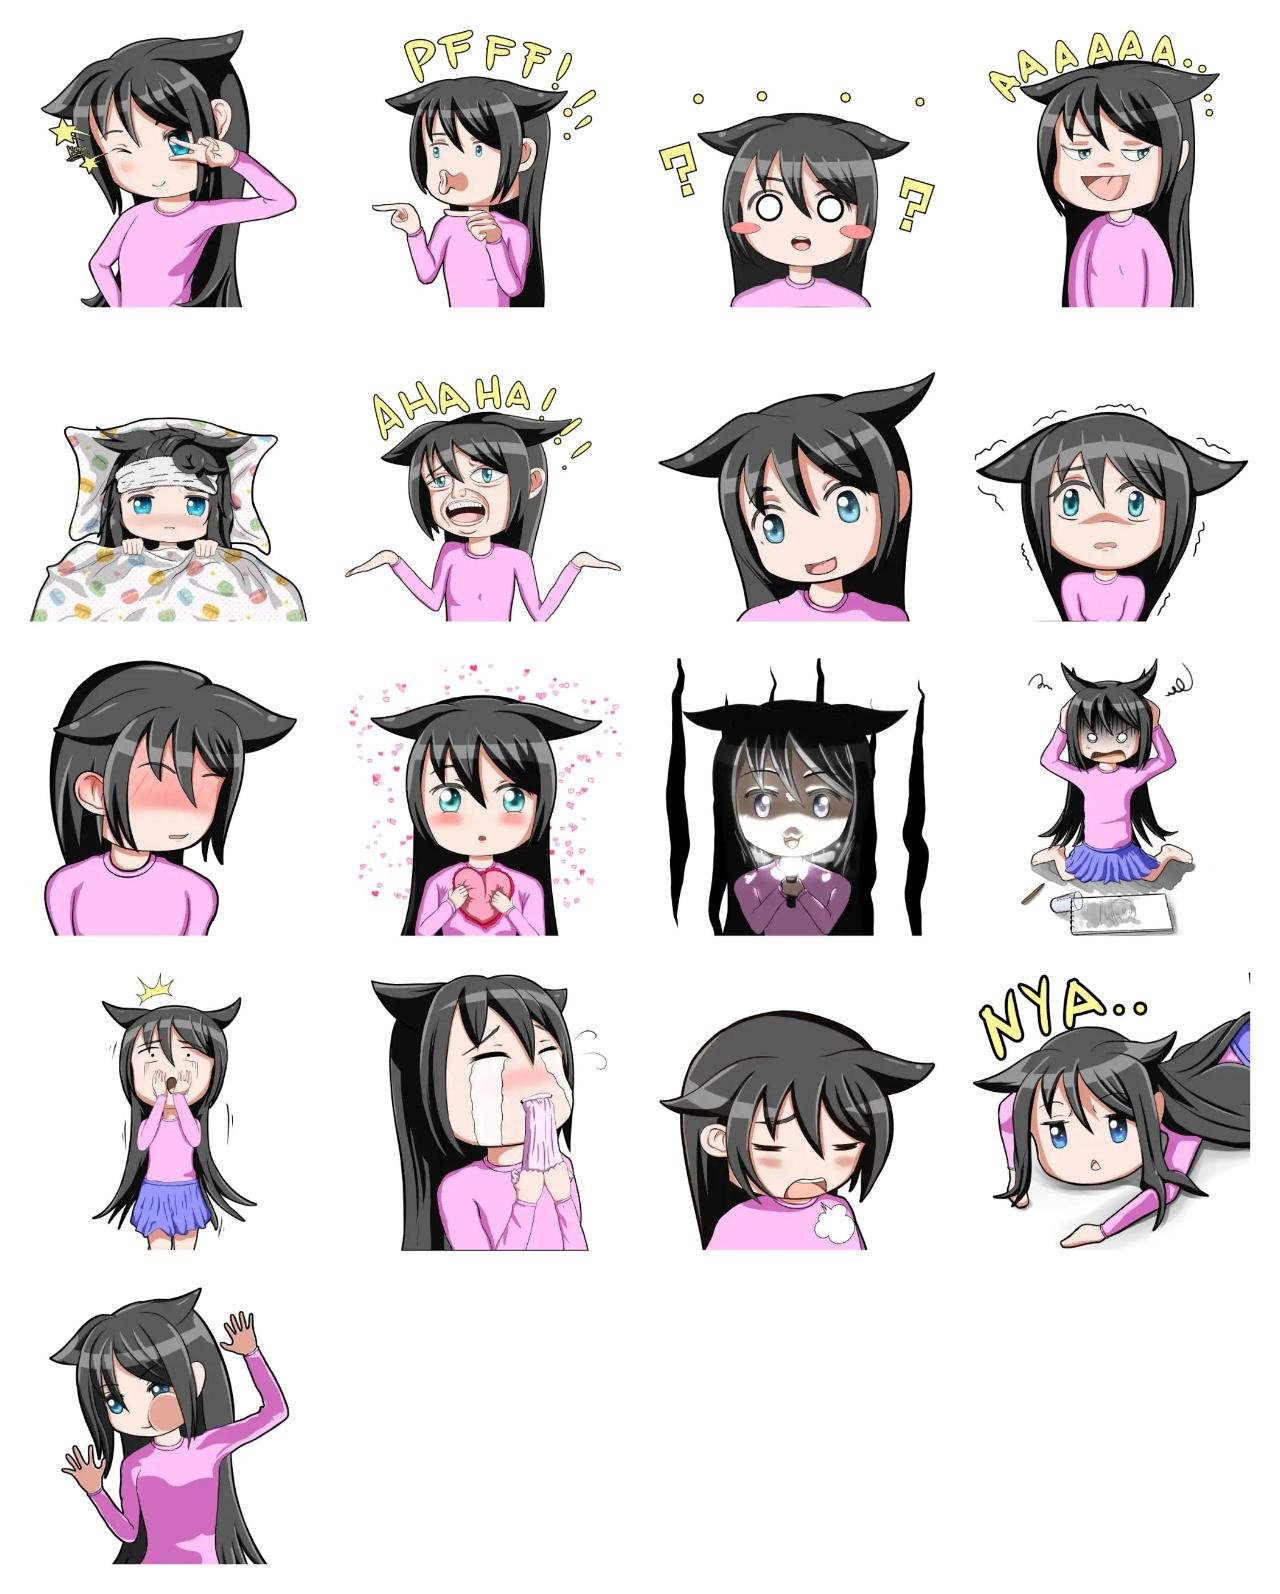 Rinnan Sticker Animation/Cartoon,Romance sticker pack for Whatsapp, Telegram, Signal, and others chatting and message apps